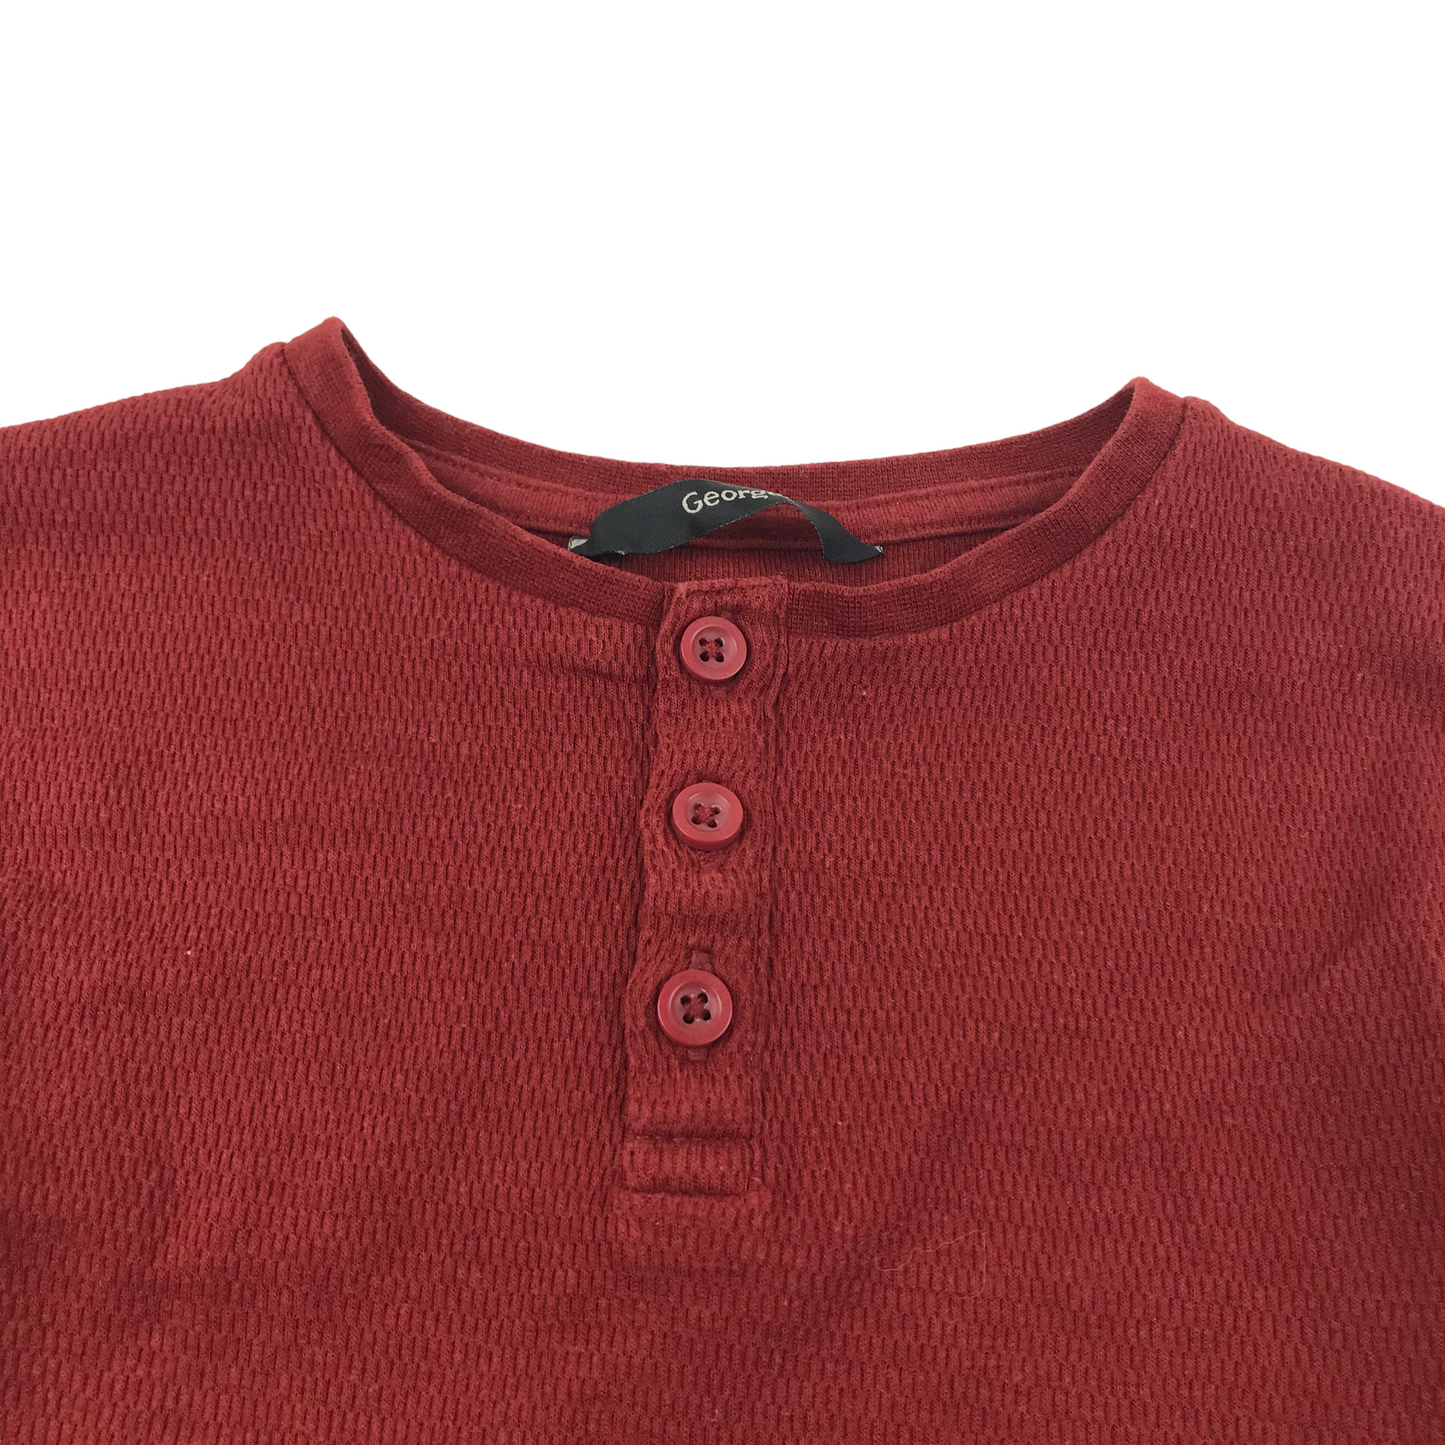 George Red Clay Long Sleeve T-shirt Age 7